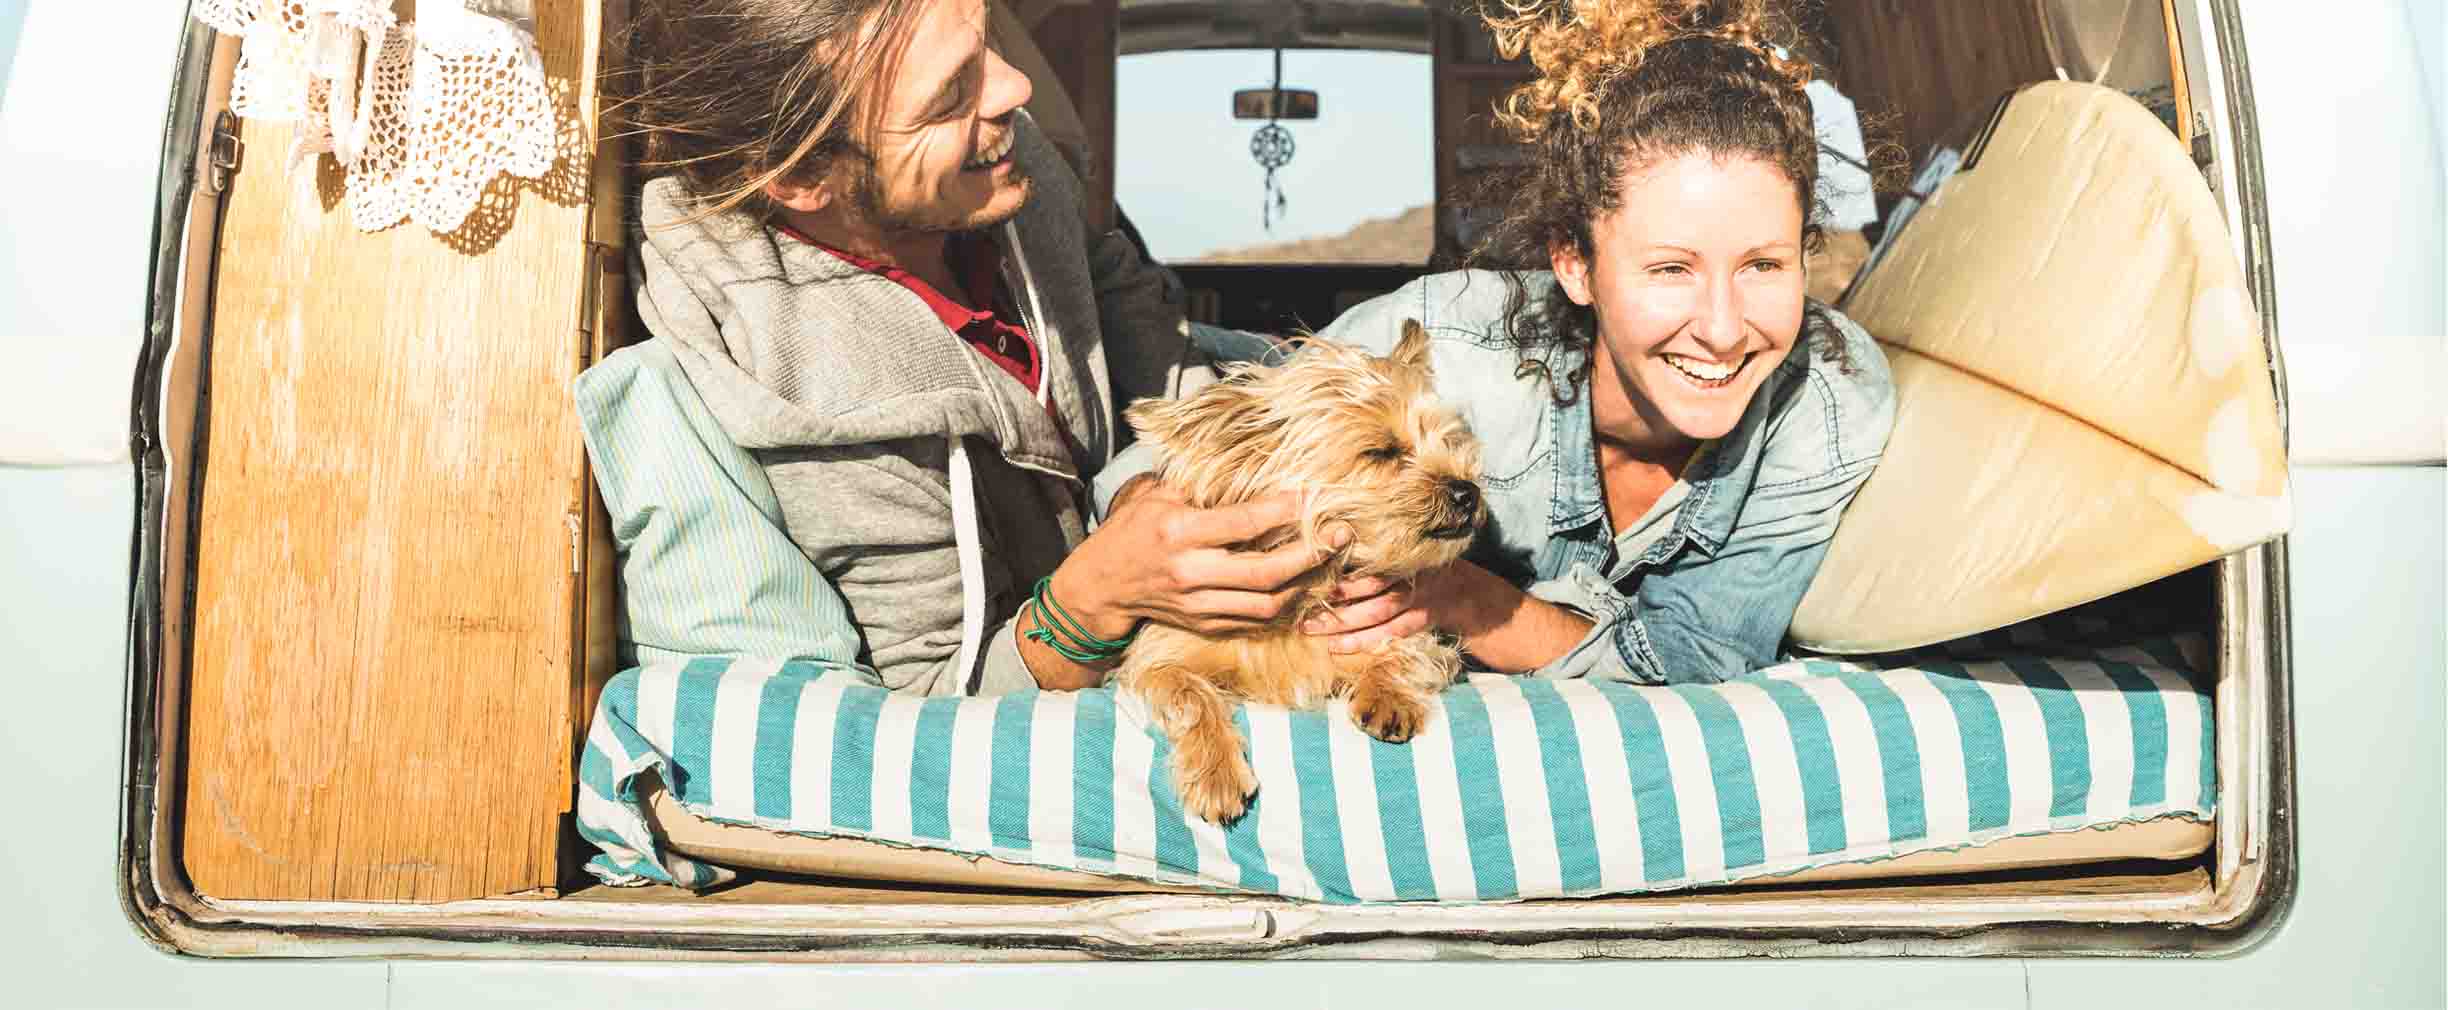 two women and a dog traveling in a van